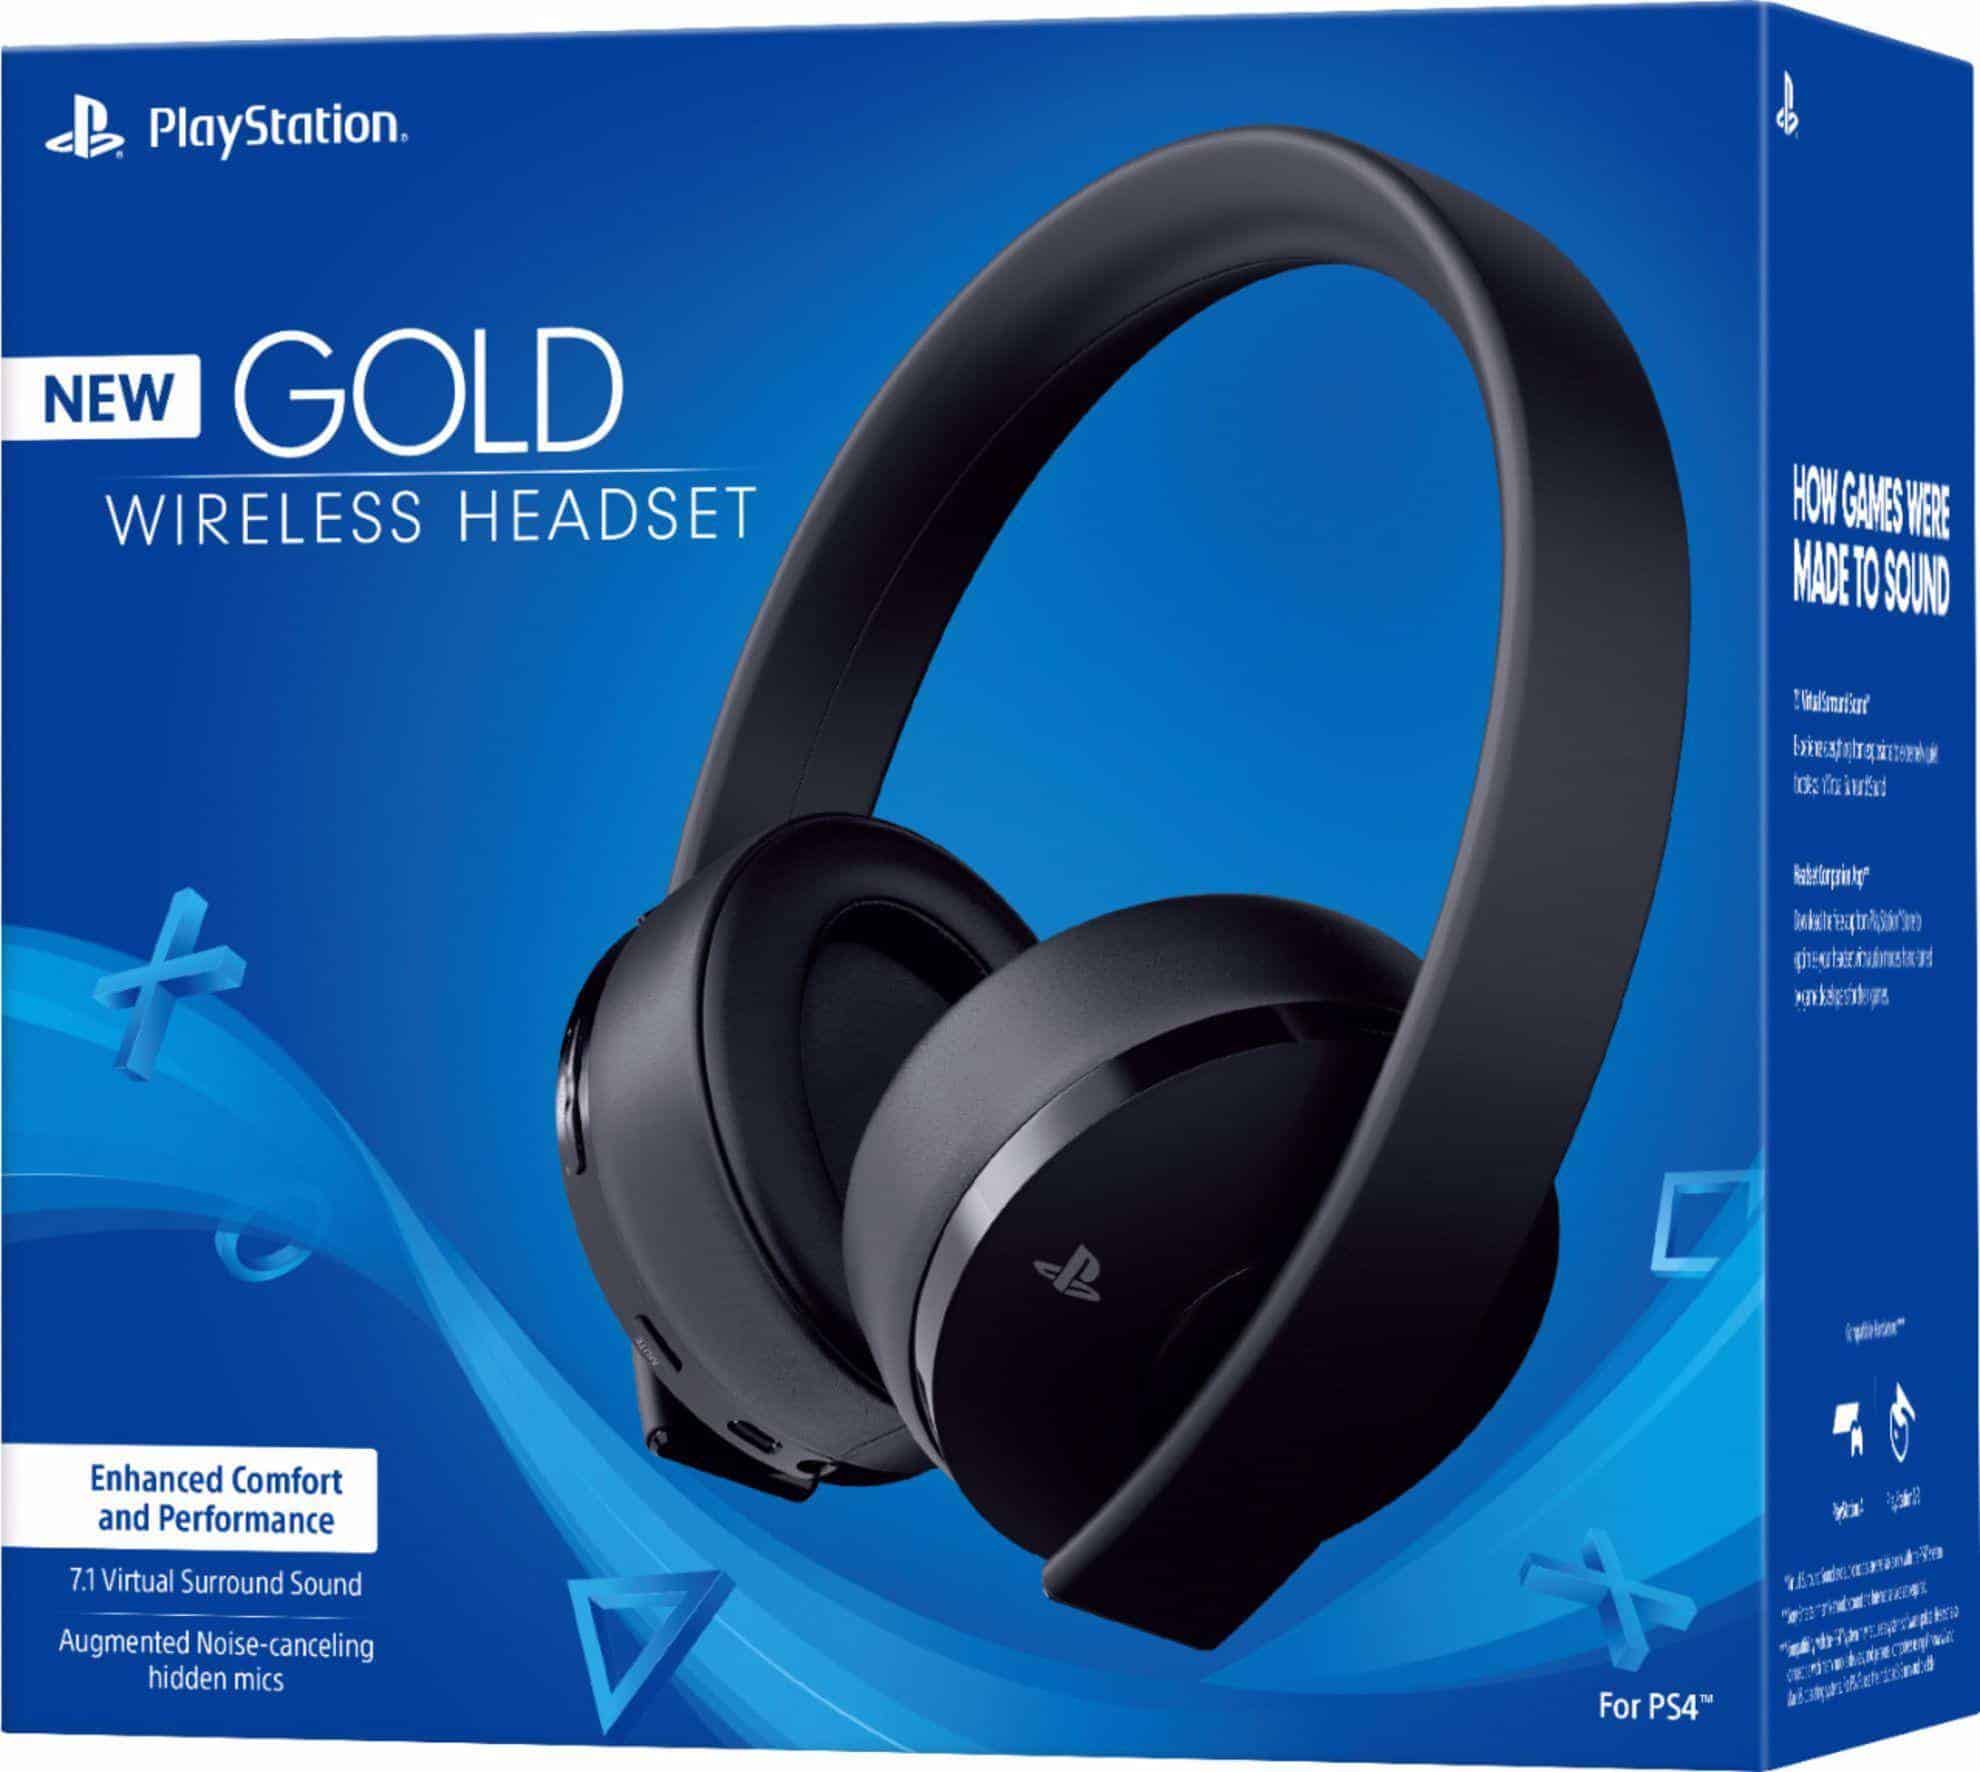 PS4 NEW GOLD WIRELESS HEADSET 7.1